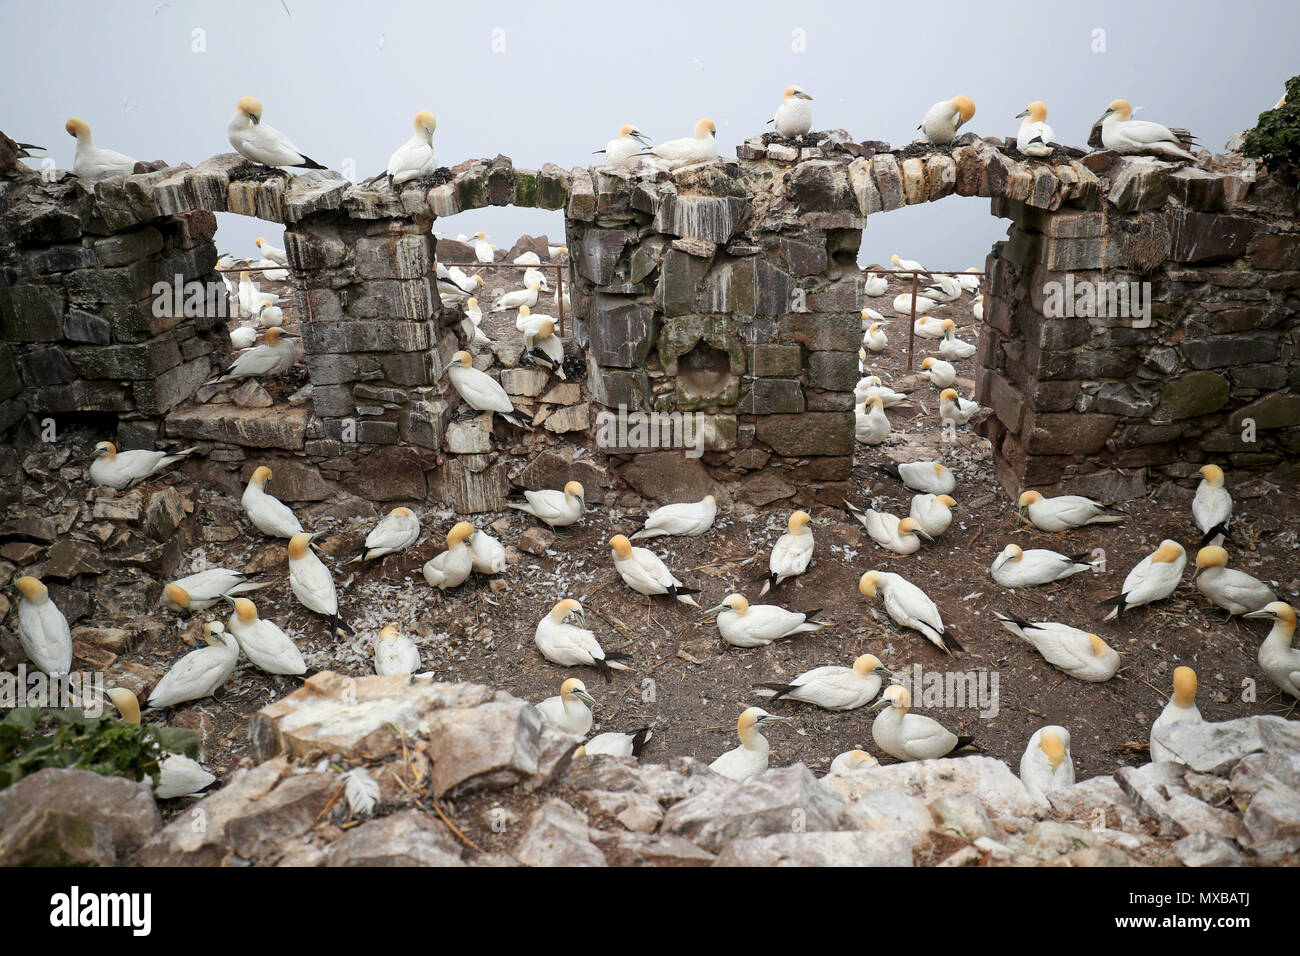 Thousands of Northern gannets gather nest material as they prepare for the new breeding season on the Bass Rock, in the Firth of Forth, forming the largest single-island colony of gannets in the world. Stock Photo